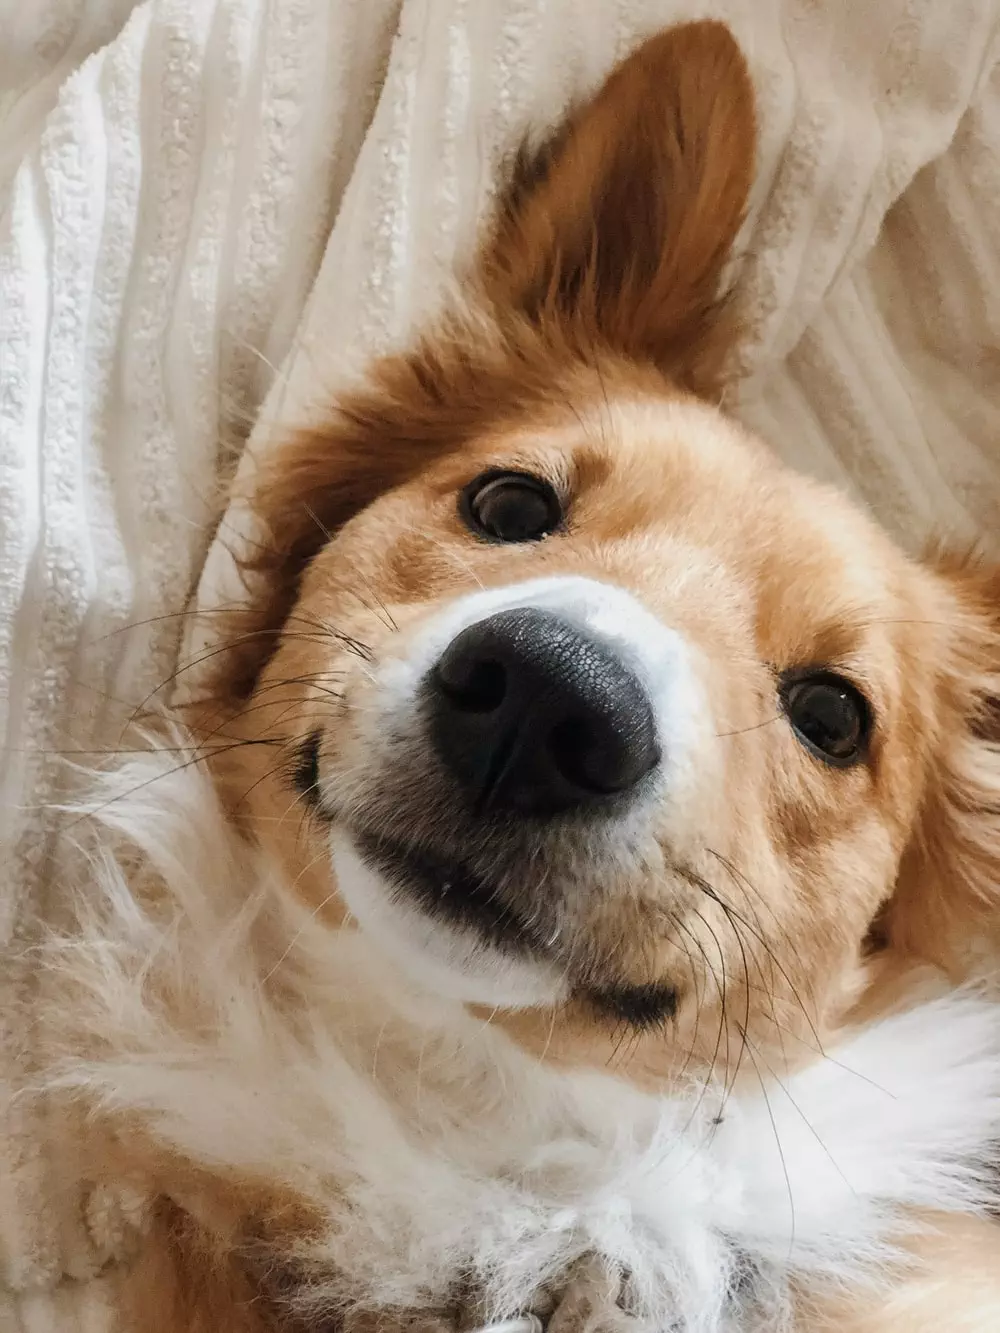 30 Of The Cutest Dogs To Brighten Up Your Day